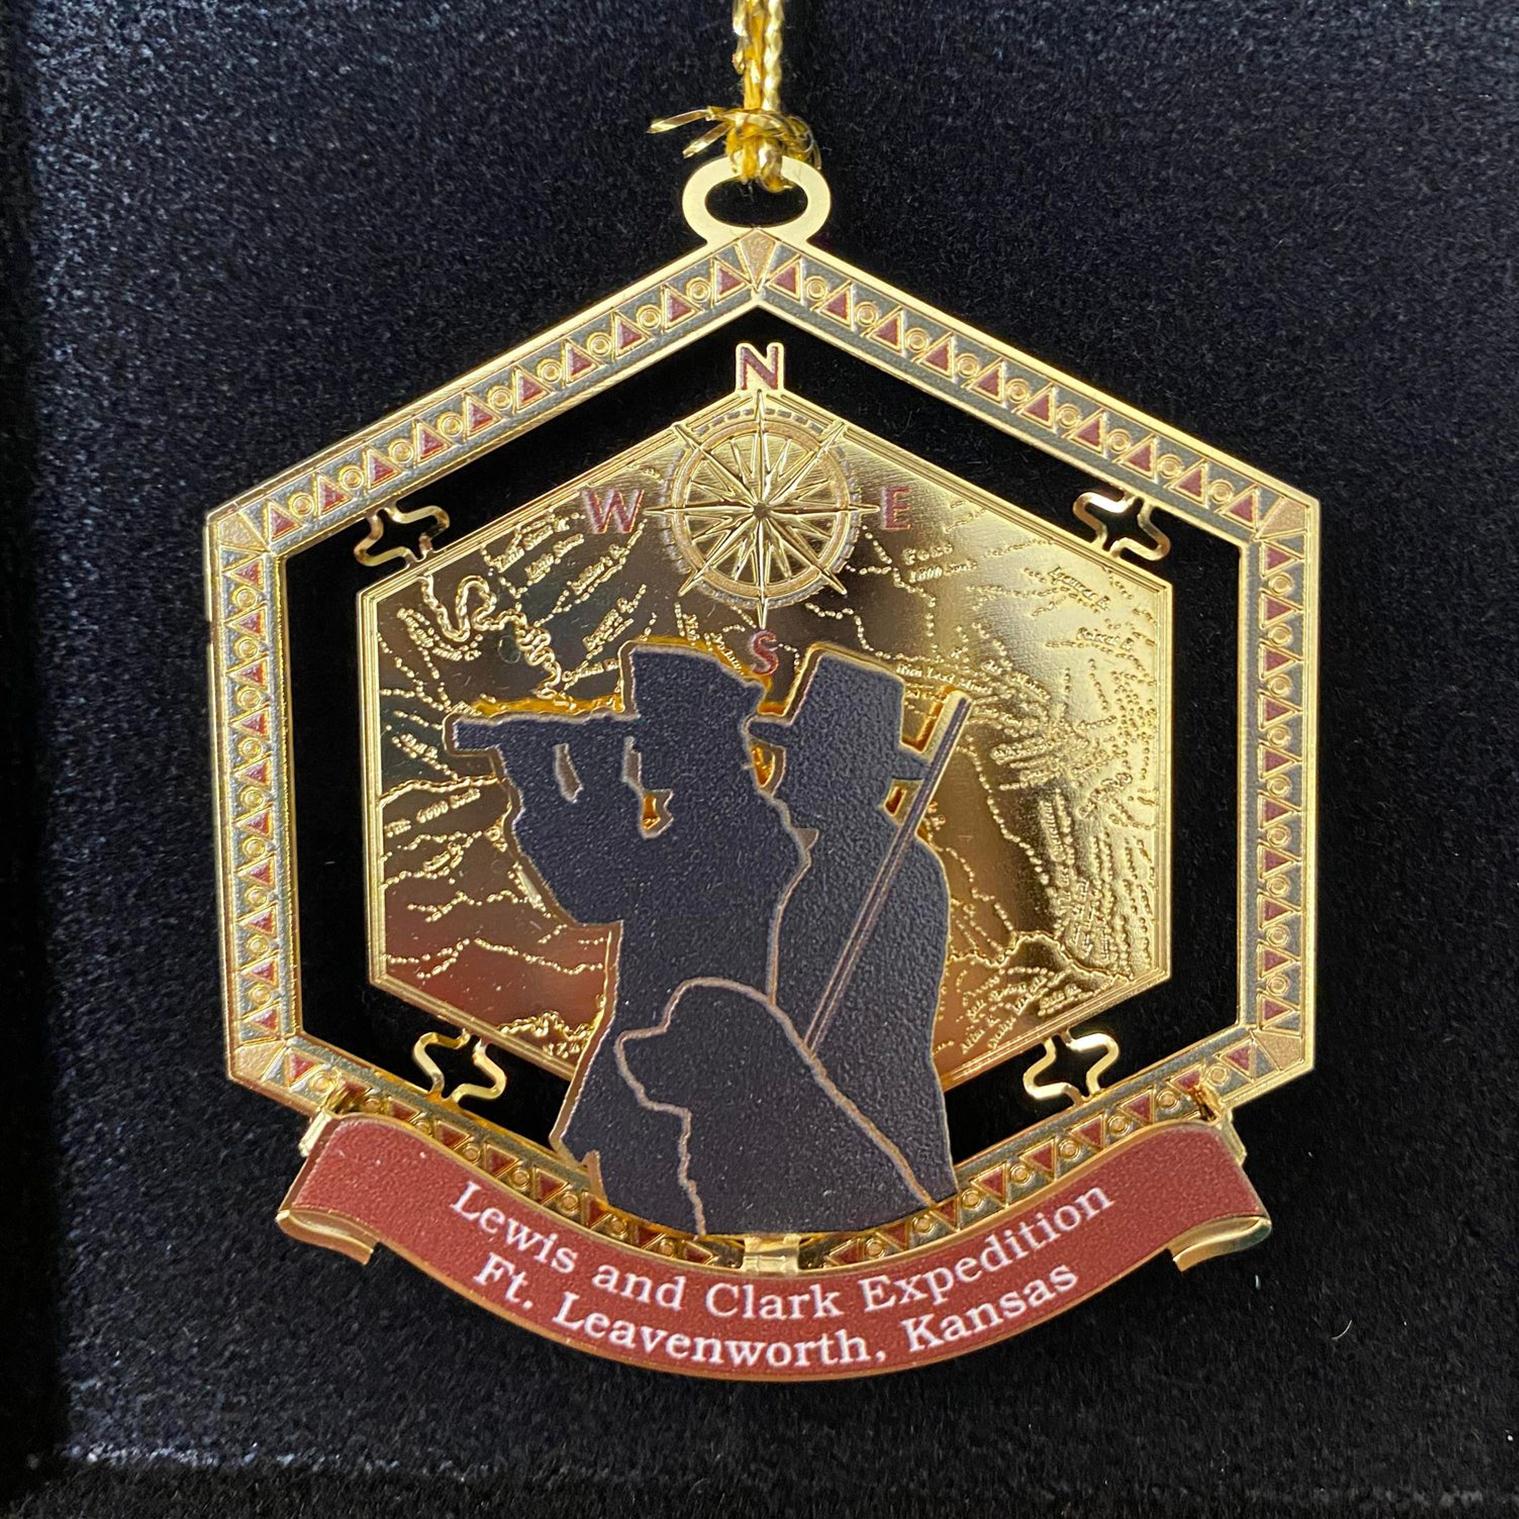 2021 Foundation ornament available